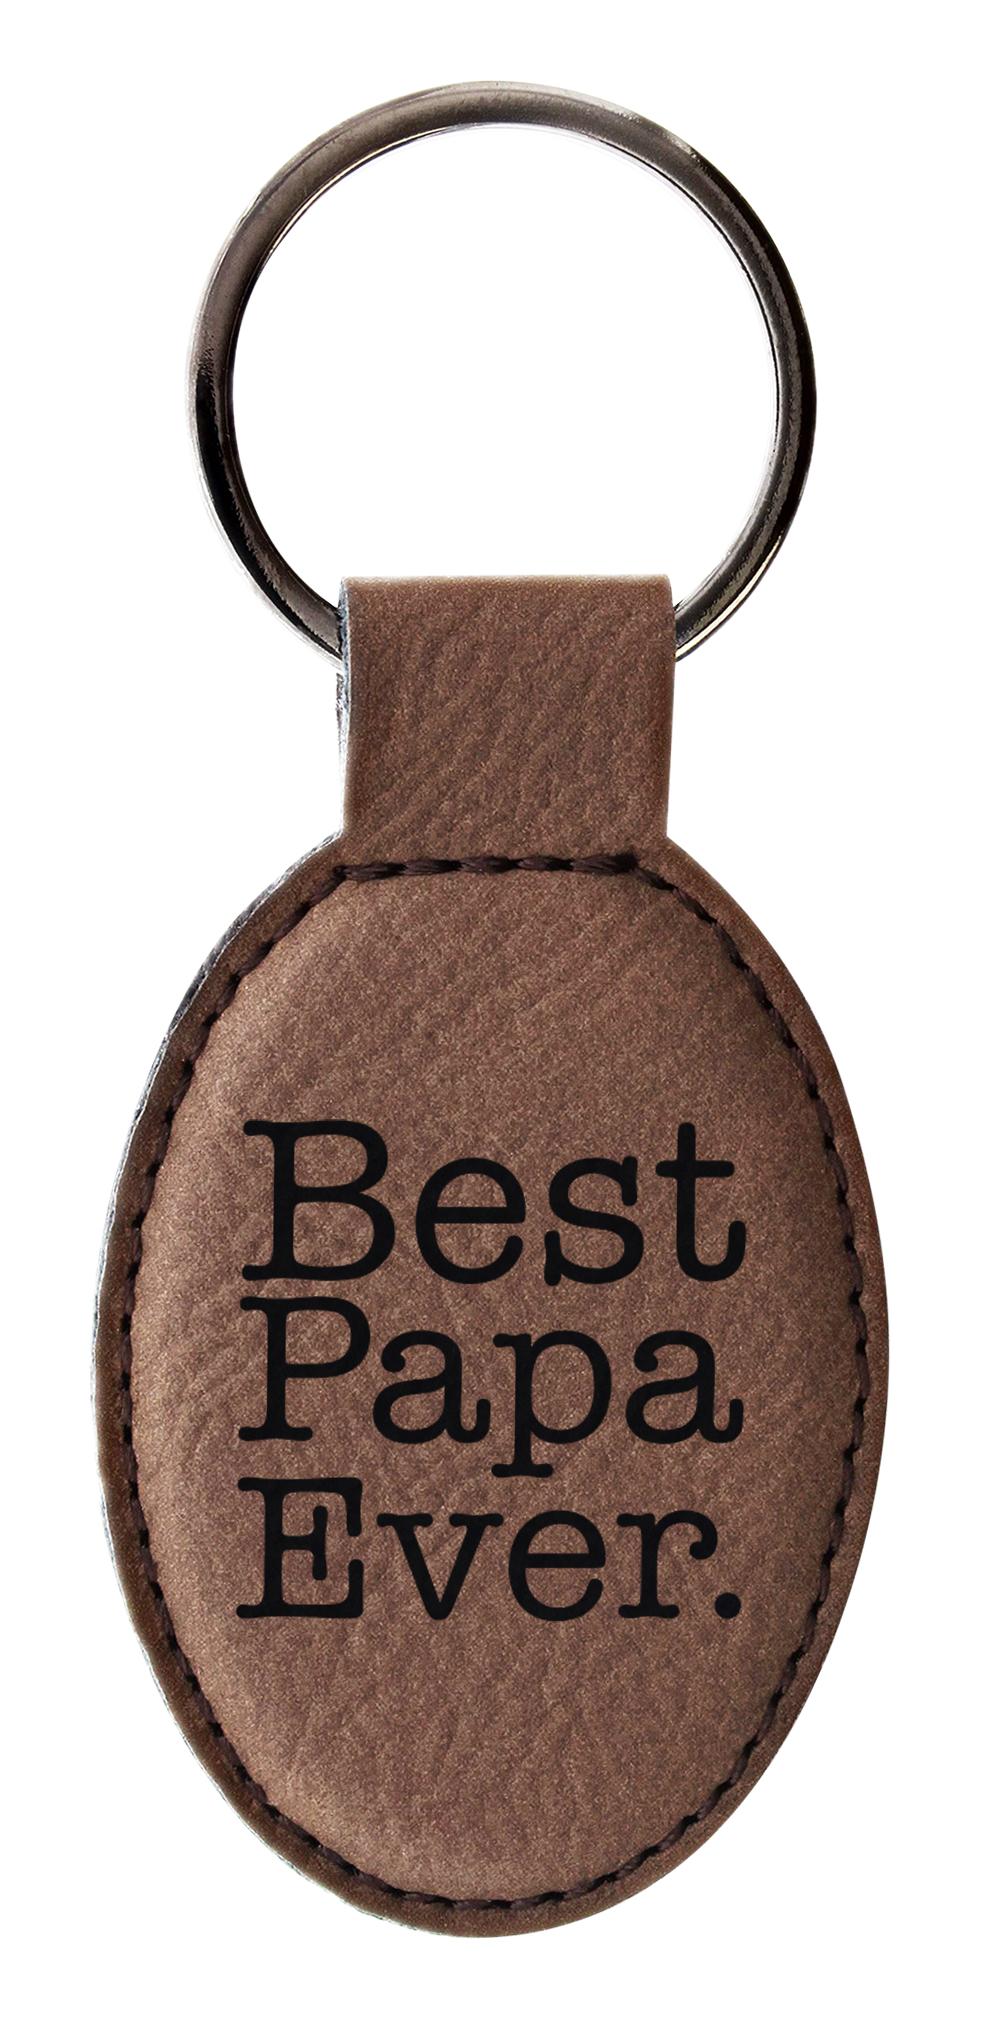 ThisWear for Papa Best Papa Ever Leather Bottle Opener Keychain Key Tag Brown 